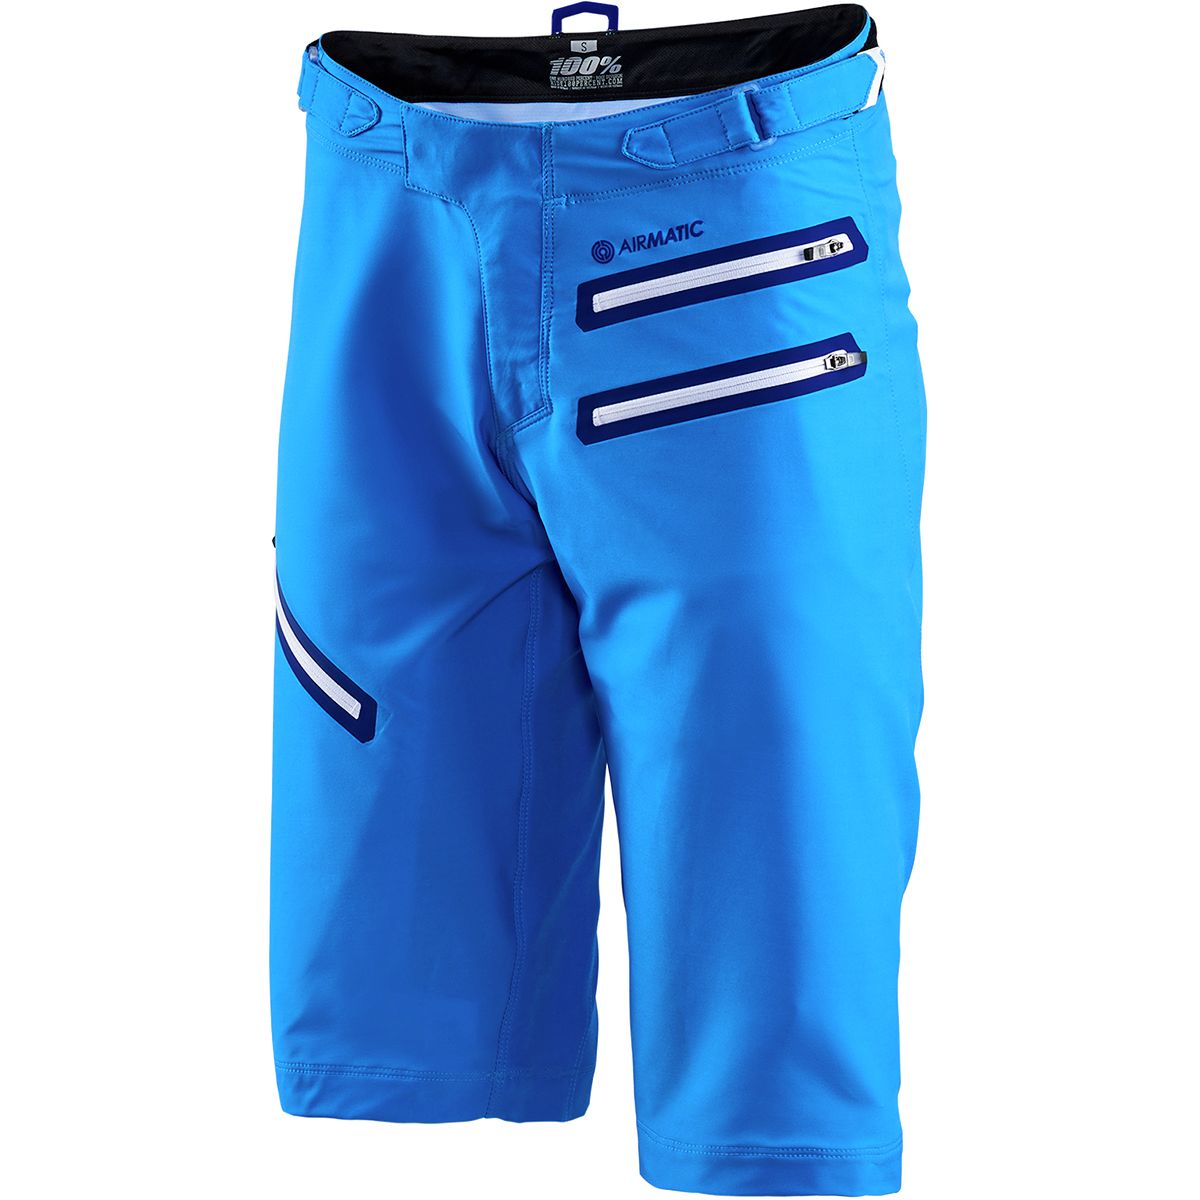 100% Airmatic Short without Liner - Women's